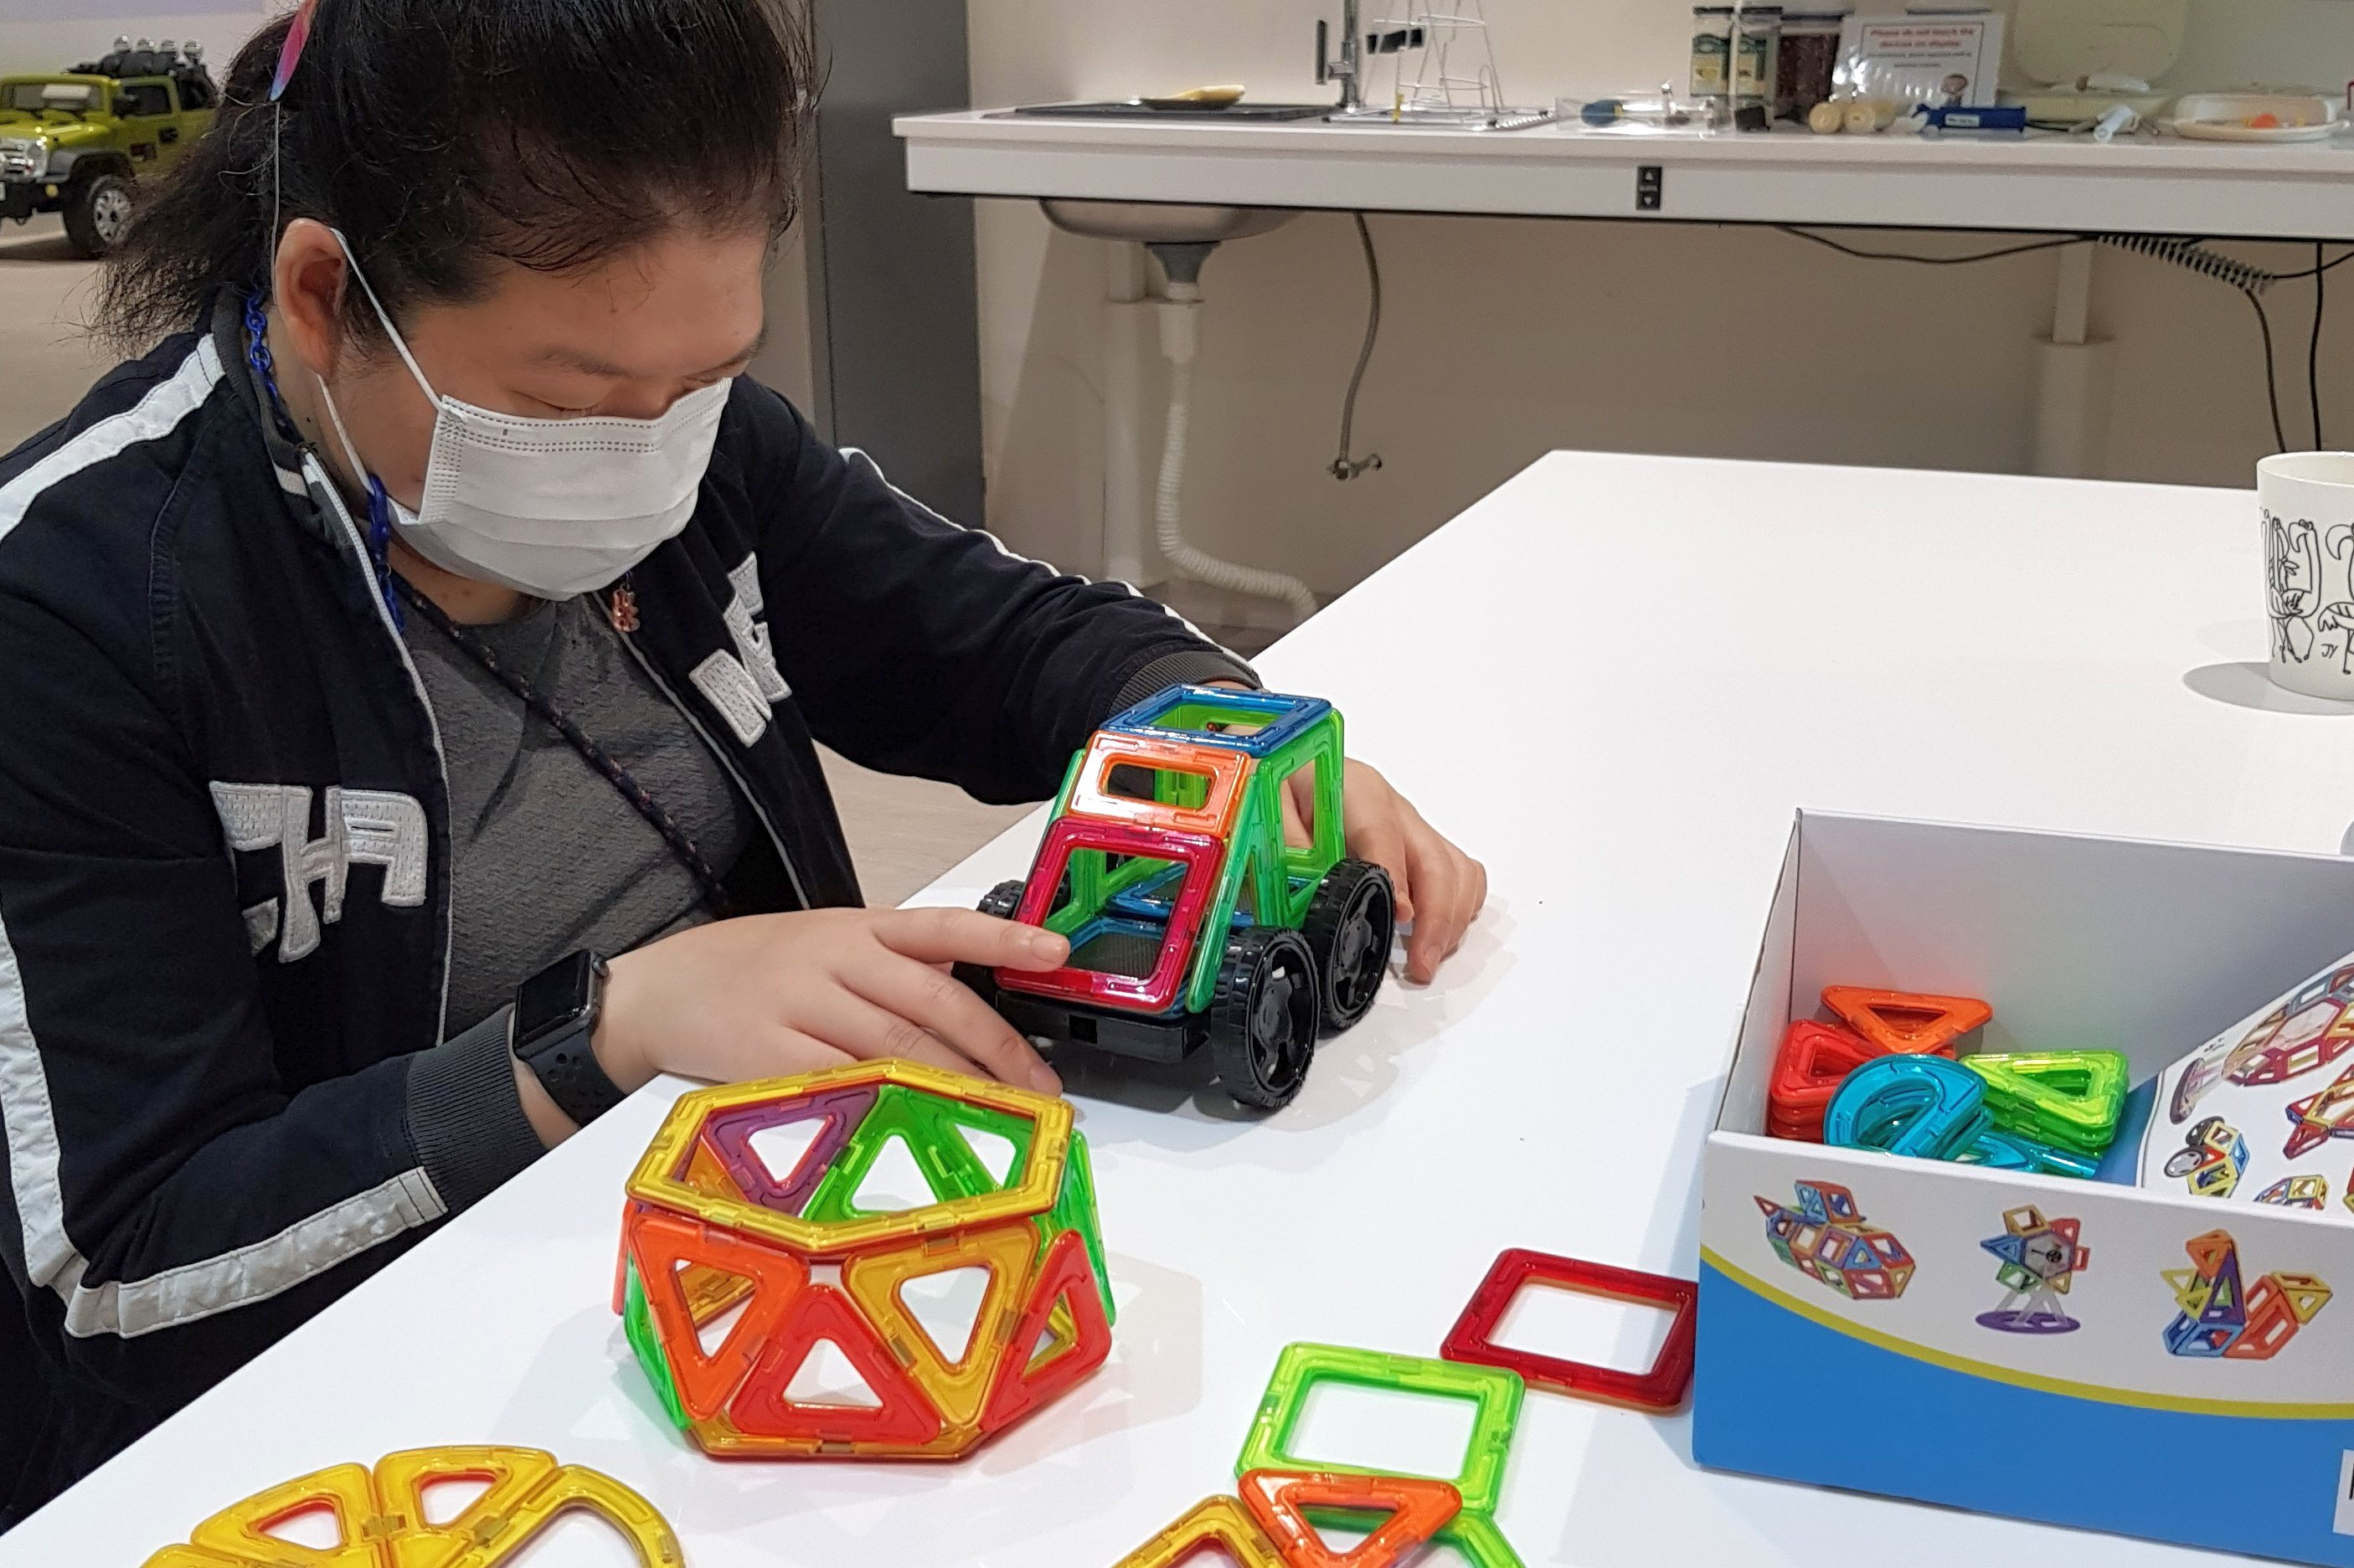 Siew Ling playing with a mini-car she made out of colourful tactile magnetic shapes.